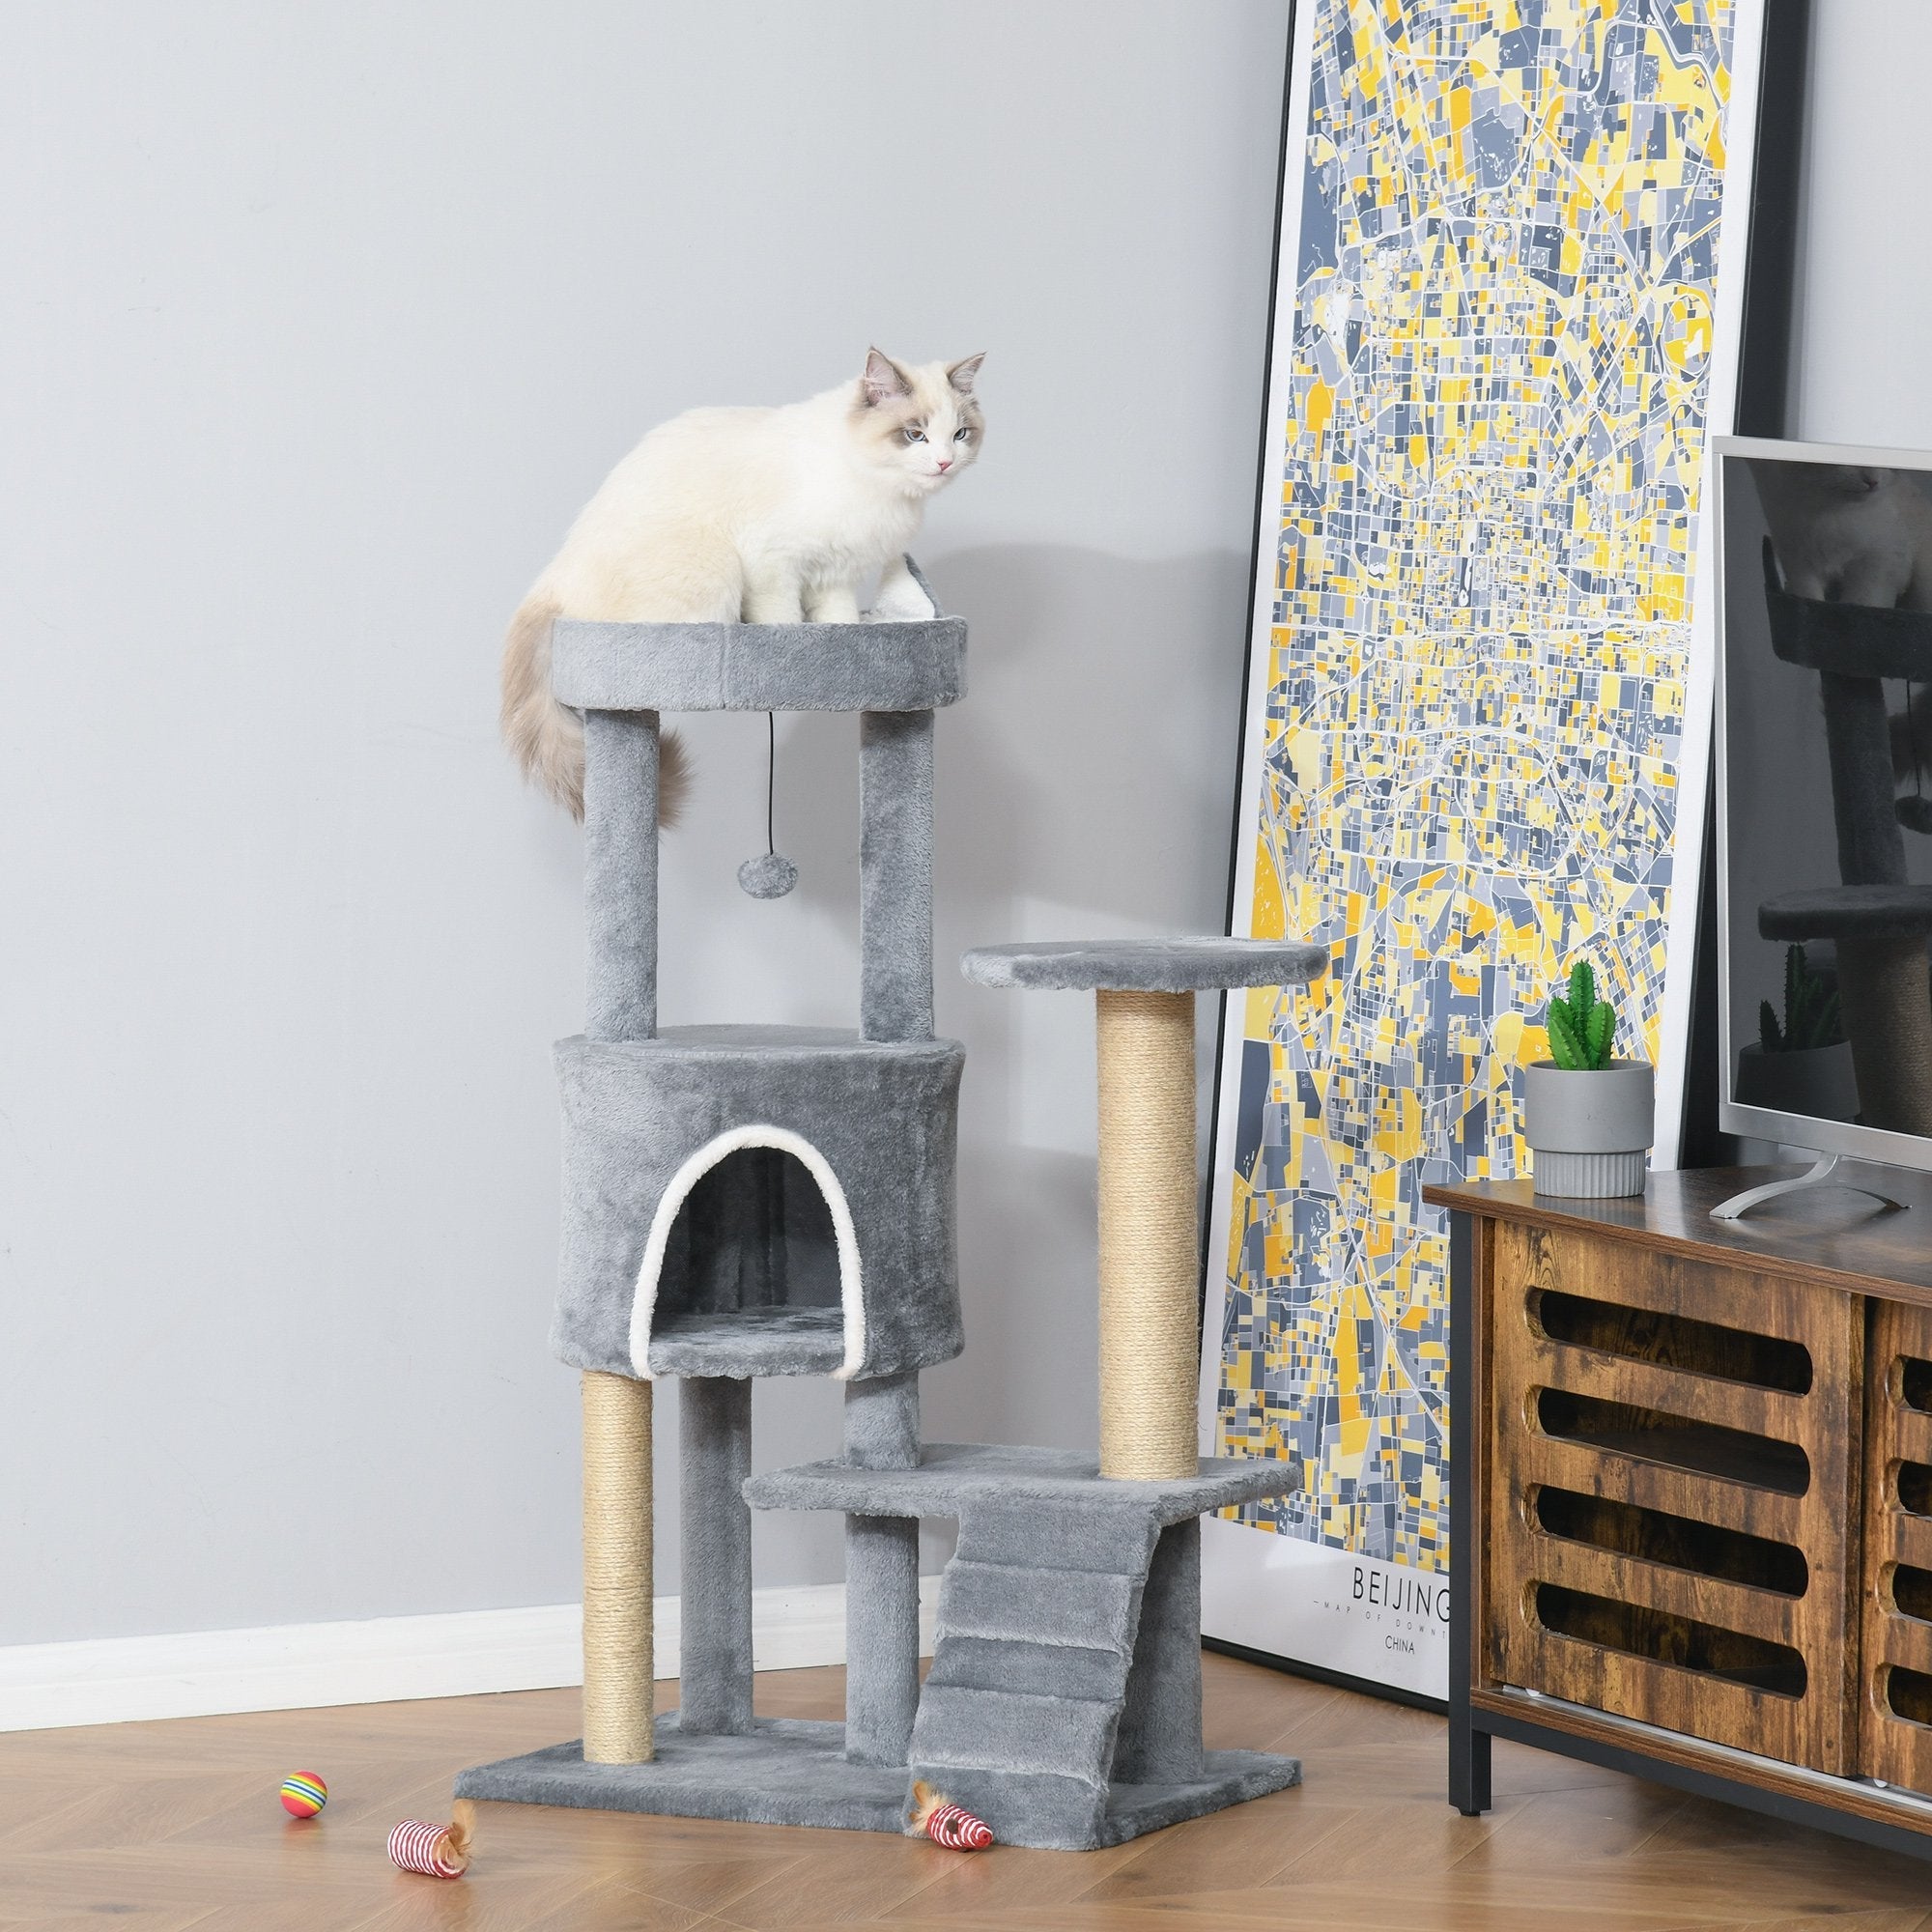 100 cm Cat Tree, Cat Condo Tree Tower for Indoor Cats, Cat Activity Centre with Scratching Posts, Plush Perch, Ladder, Hanging Ball - Light Grey, PawHut,